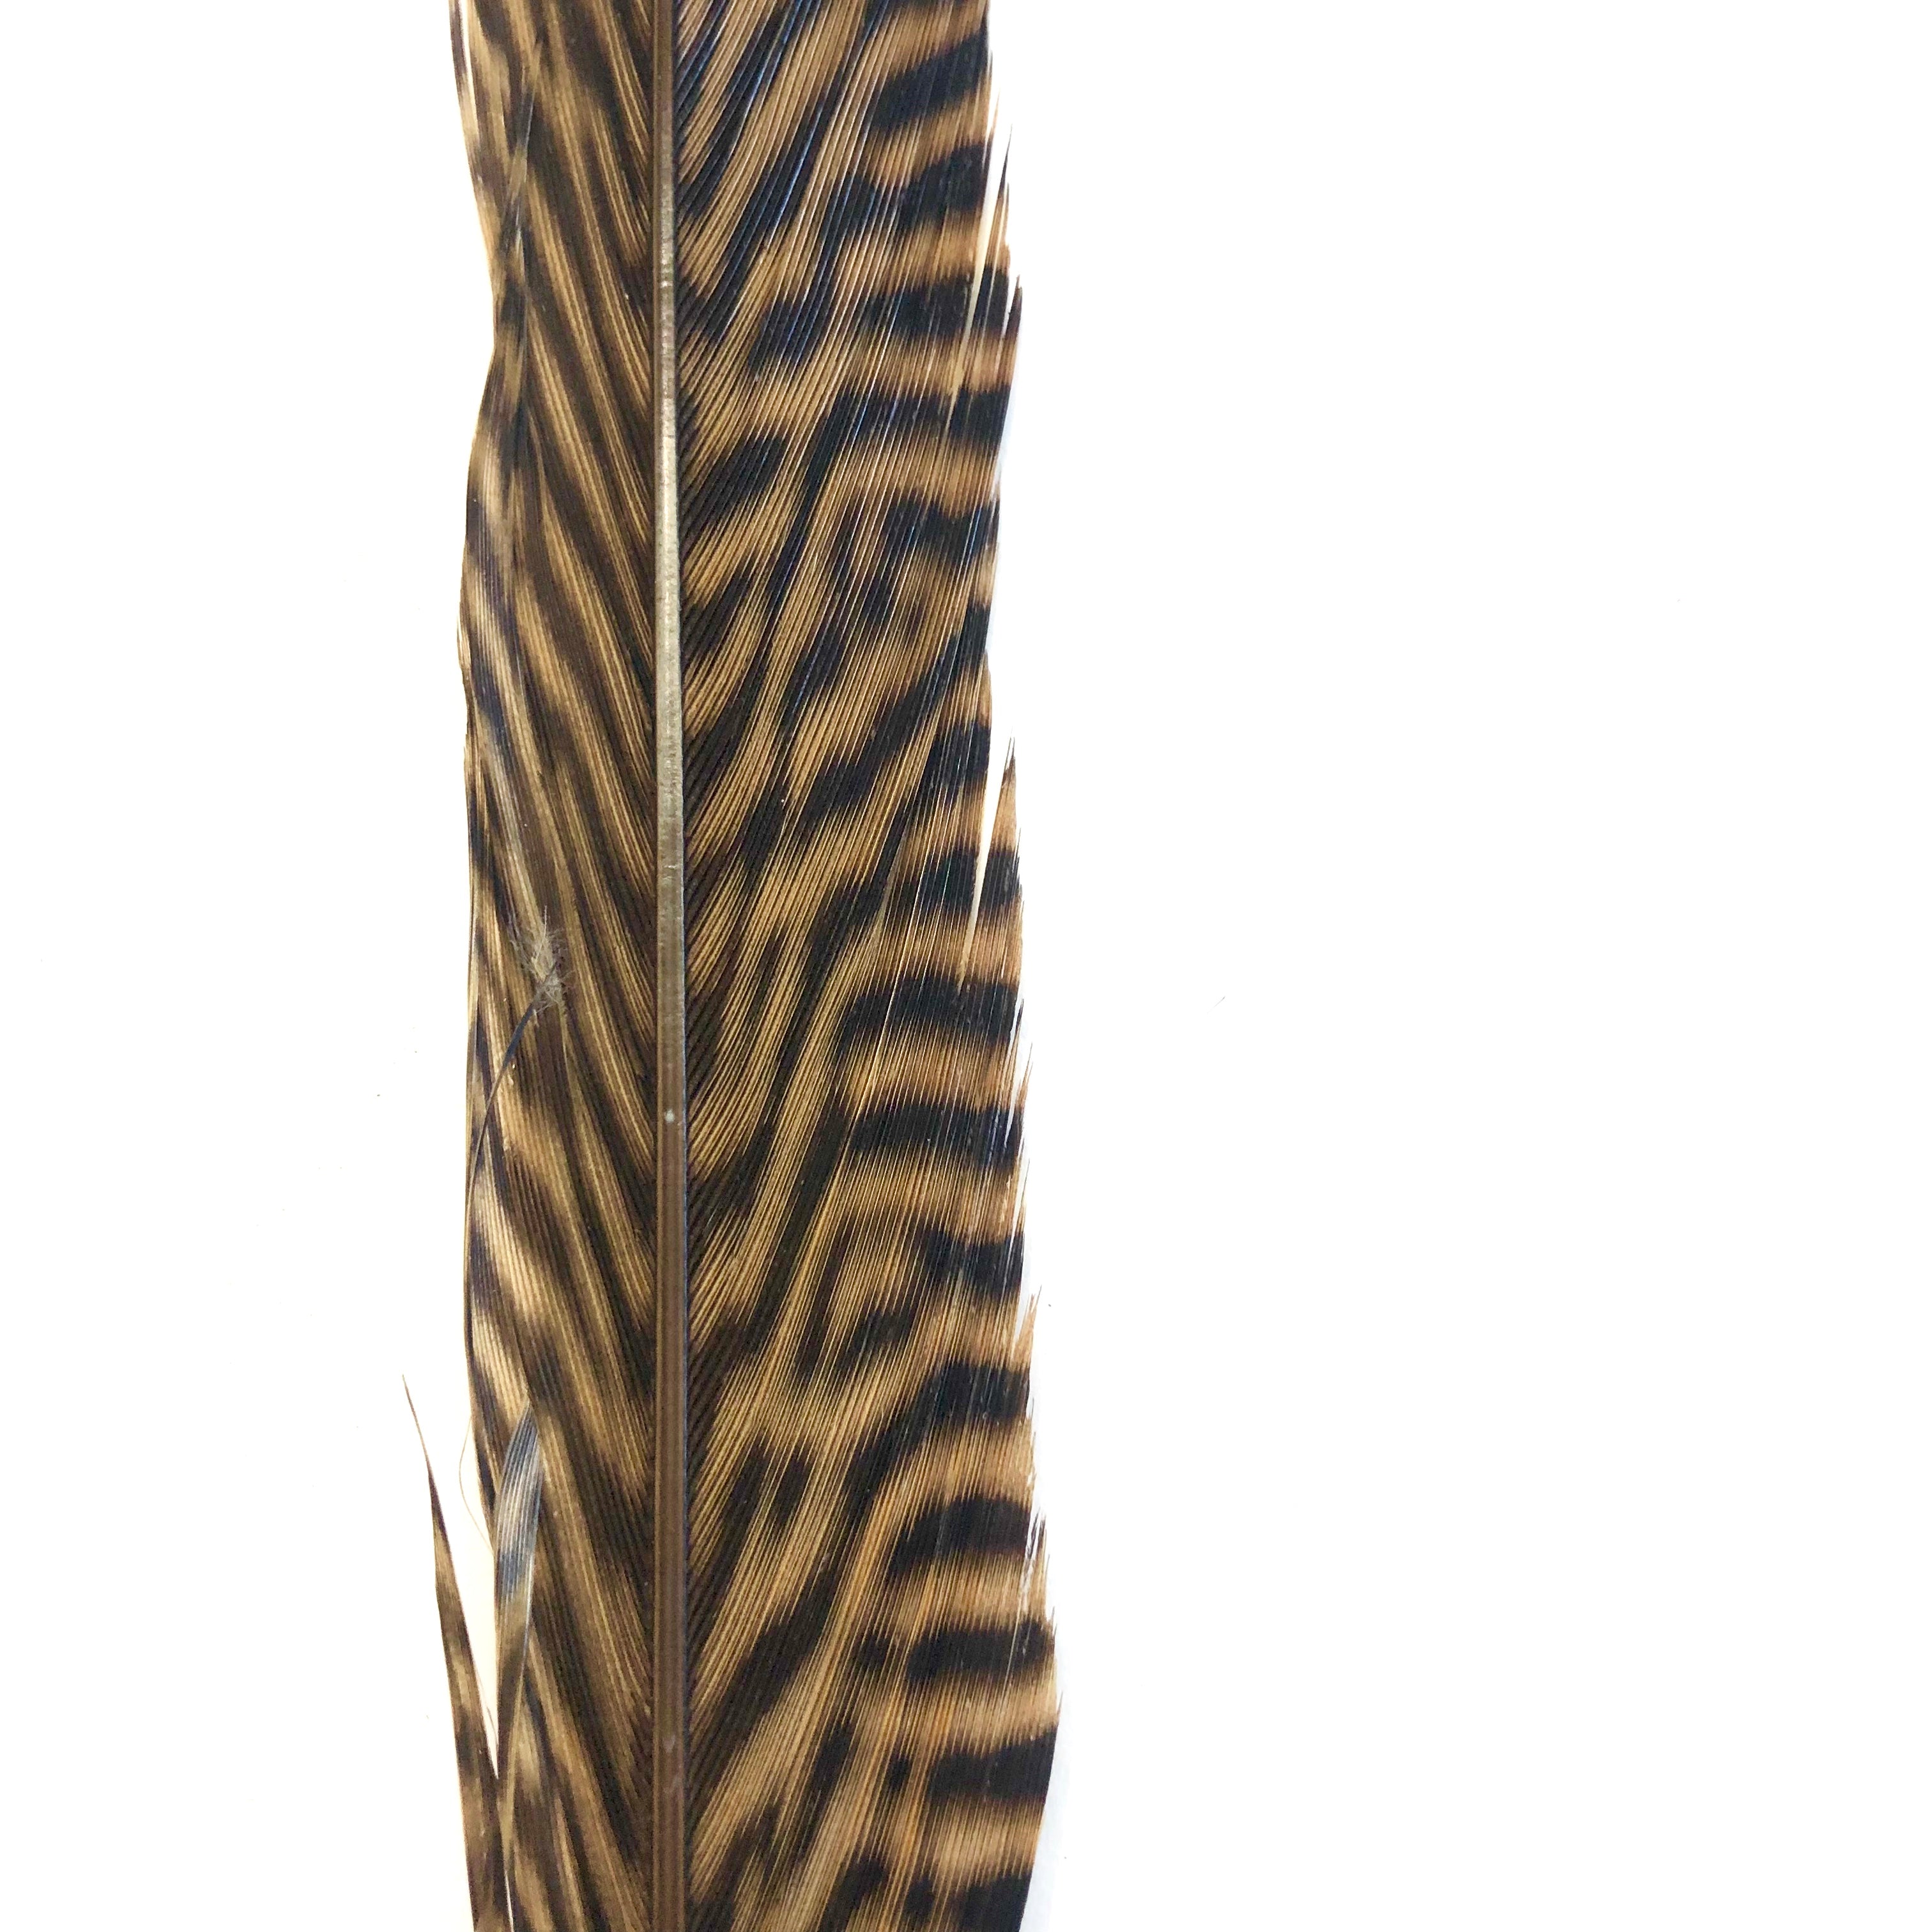 20" to 30" Golden Pheasant Side Tail Feather - Natural